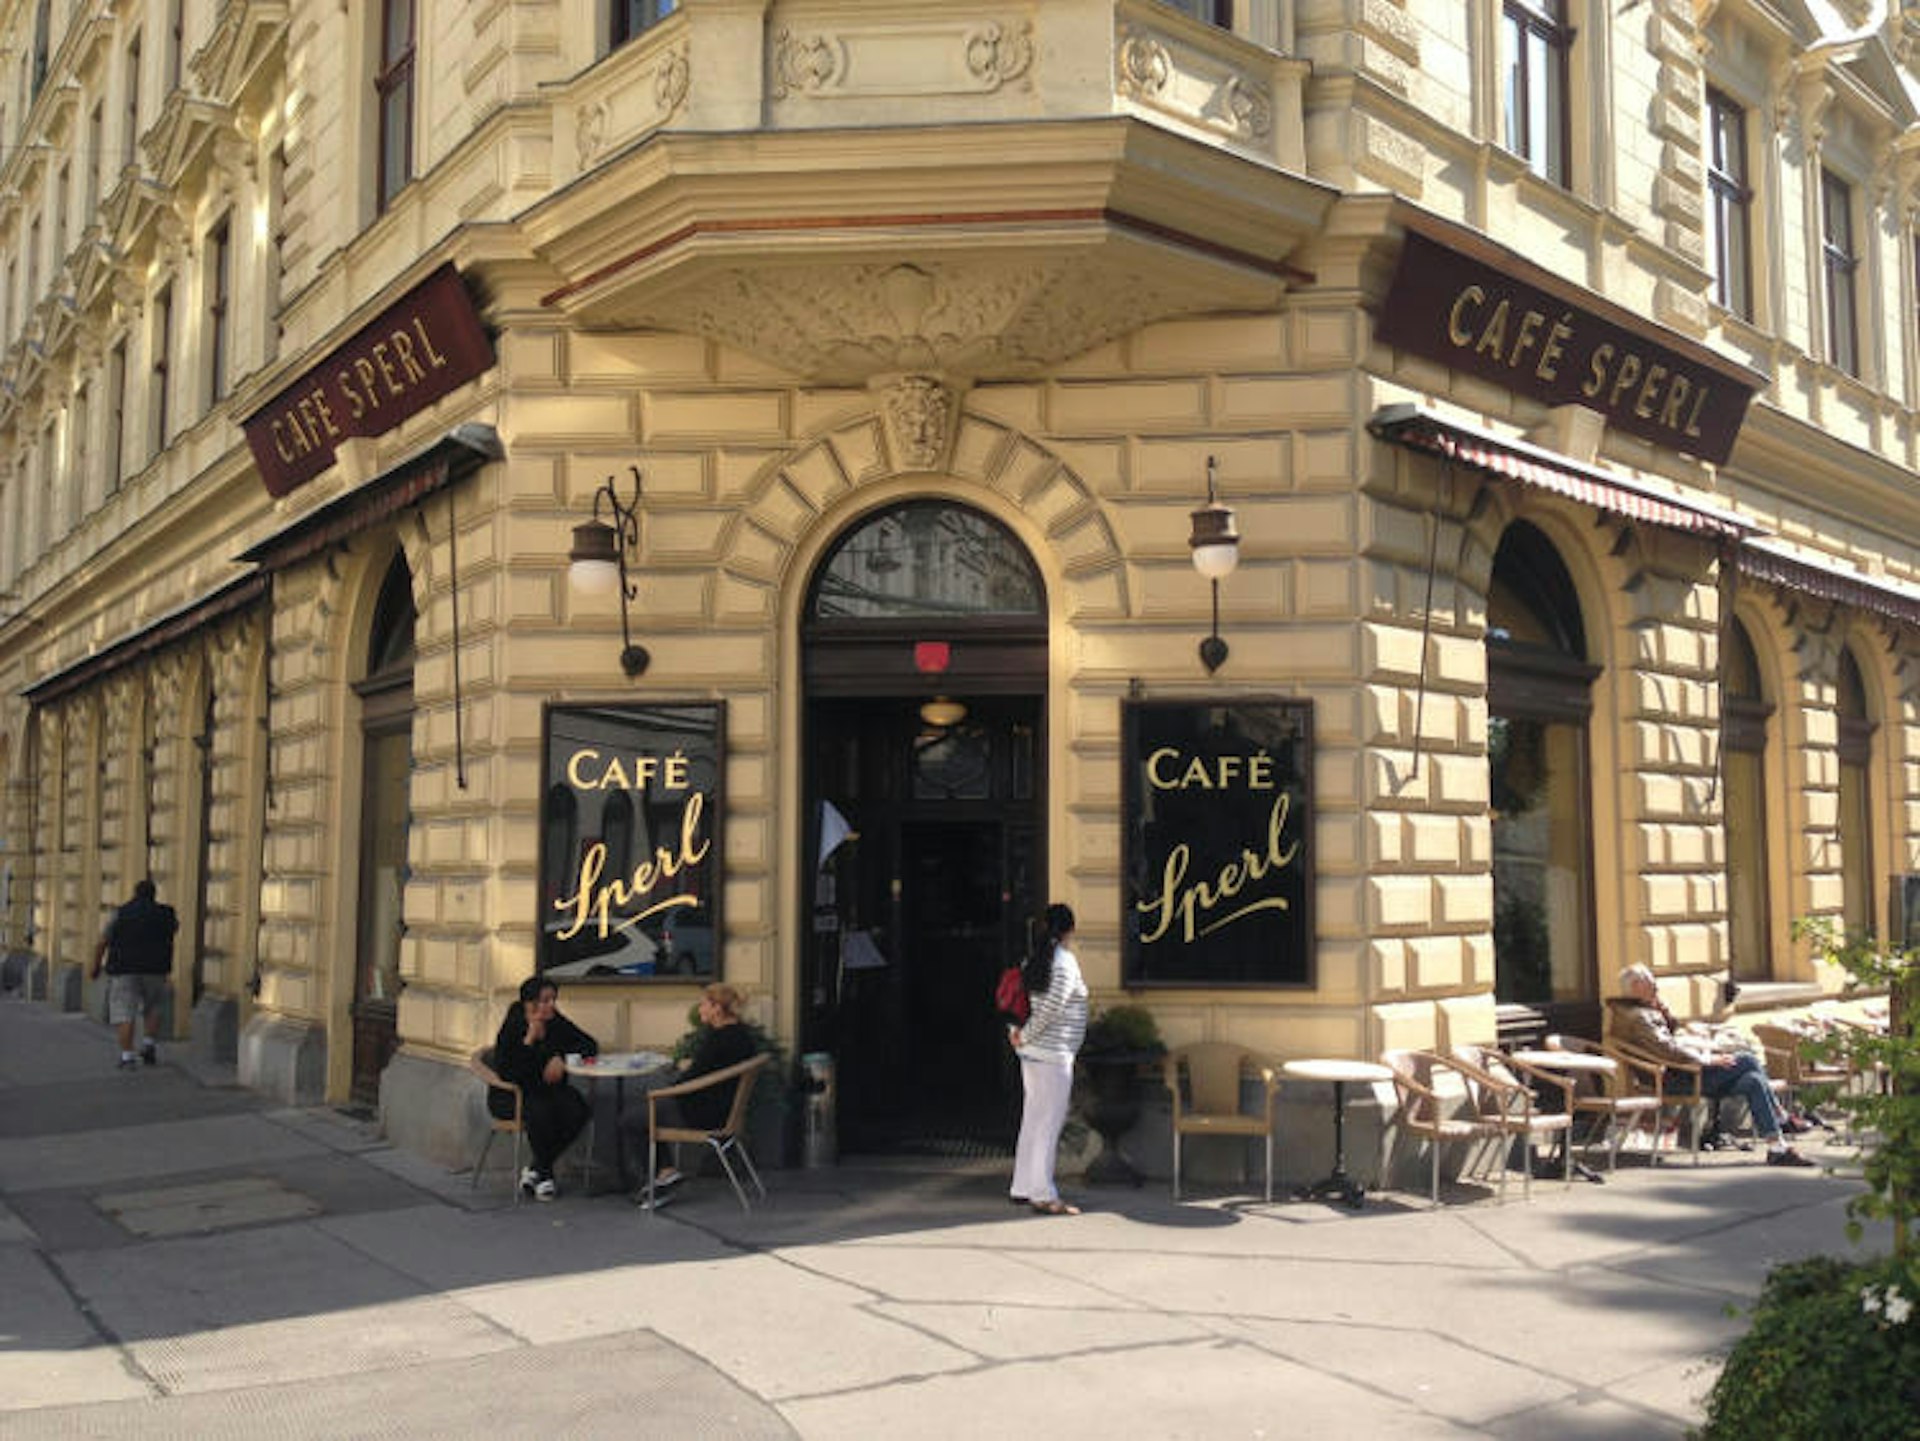 Café Sperl, one of the finest coffee houses in the city. Image by Andrew Nash/CC BY-SA 2.0